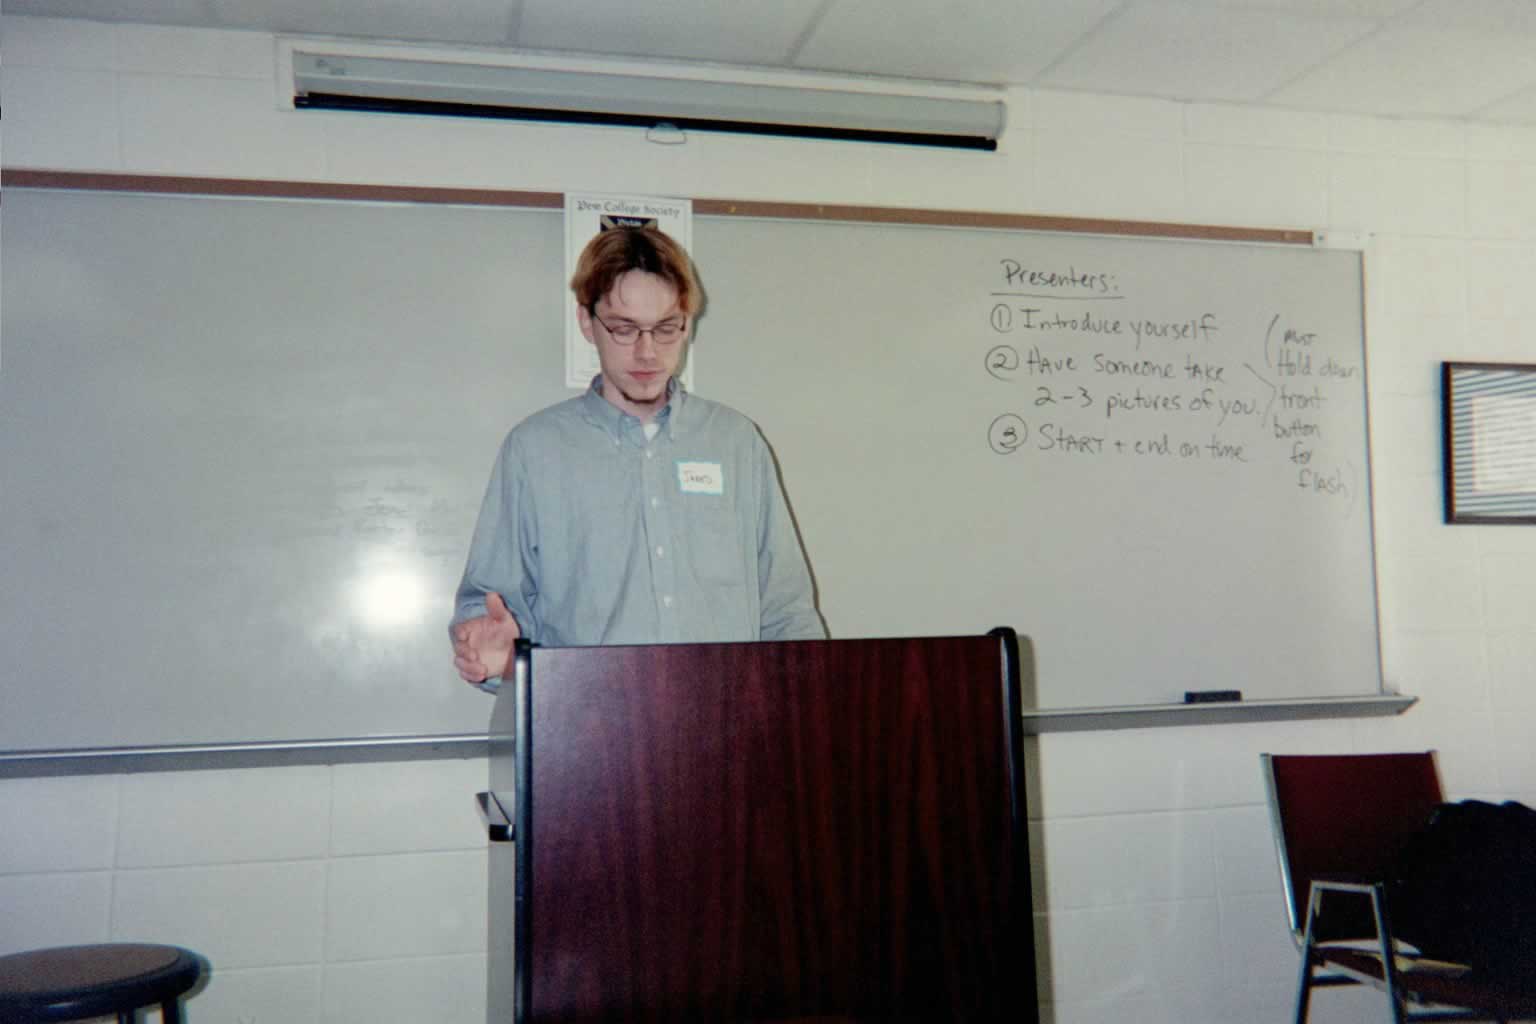 picture of a man wearing a blue shirt with glasses standing behind the podium speaking